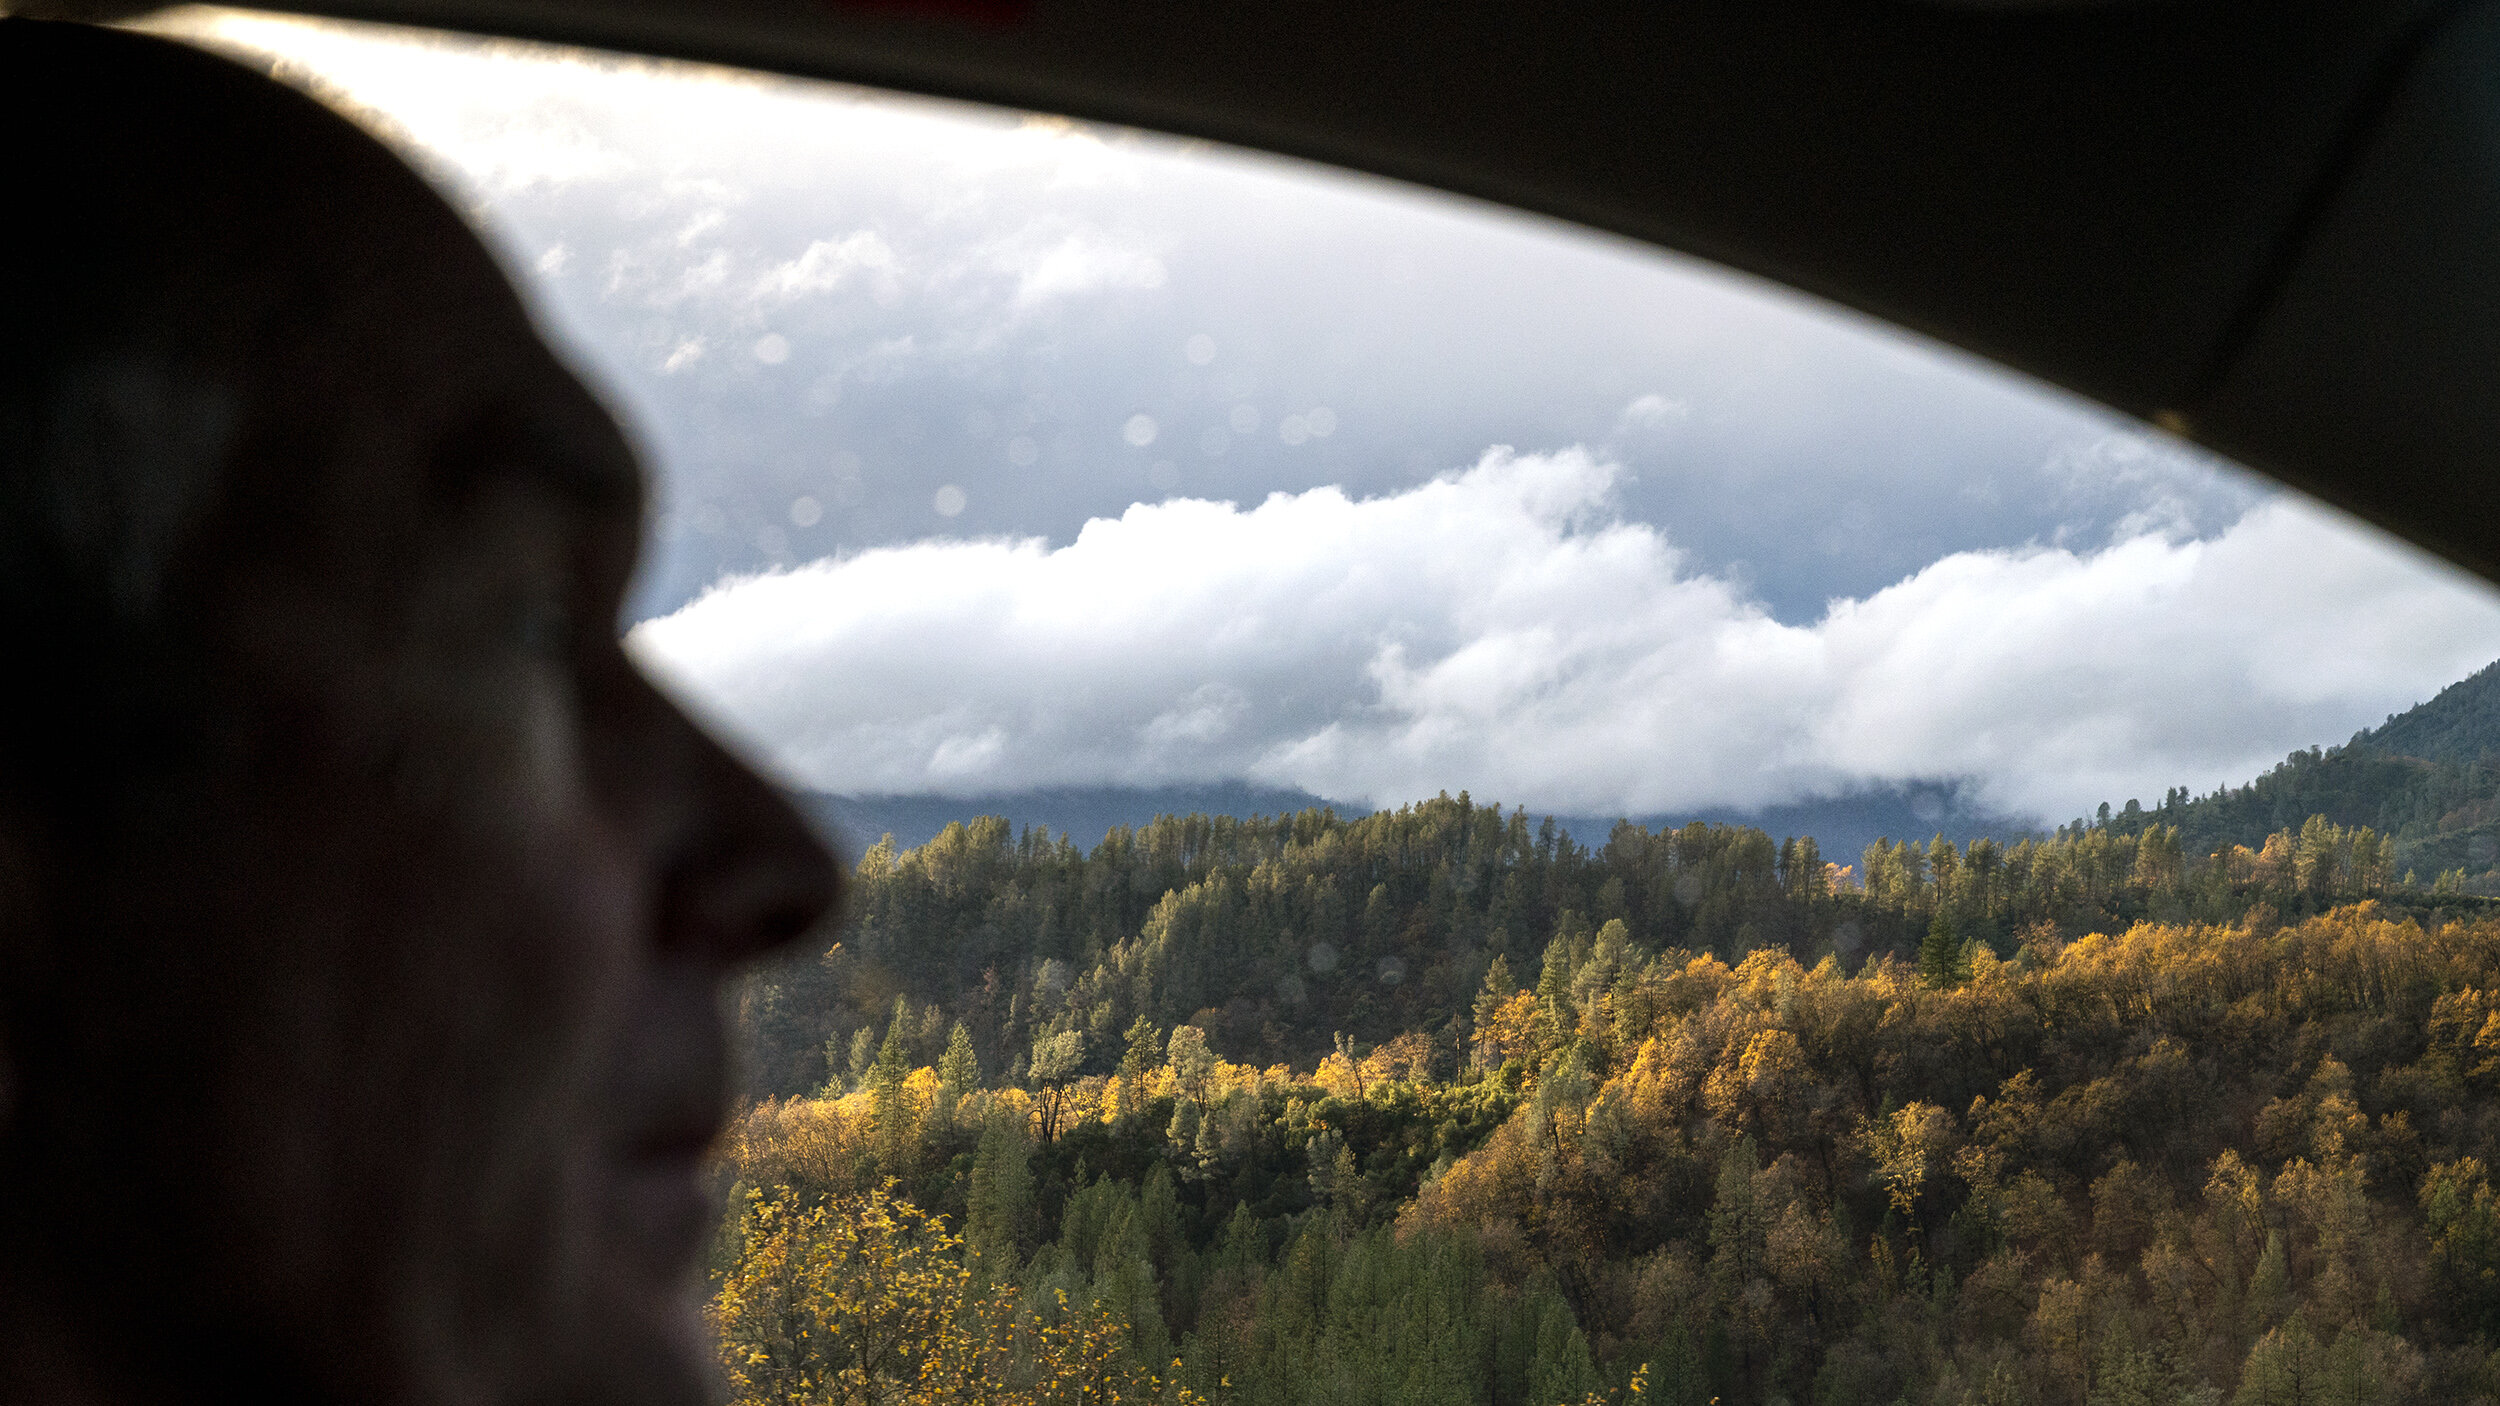  My dad driving north along Interstate 5 south of Weed, California on Saturday. 